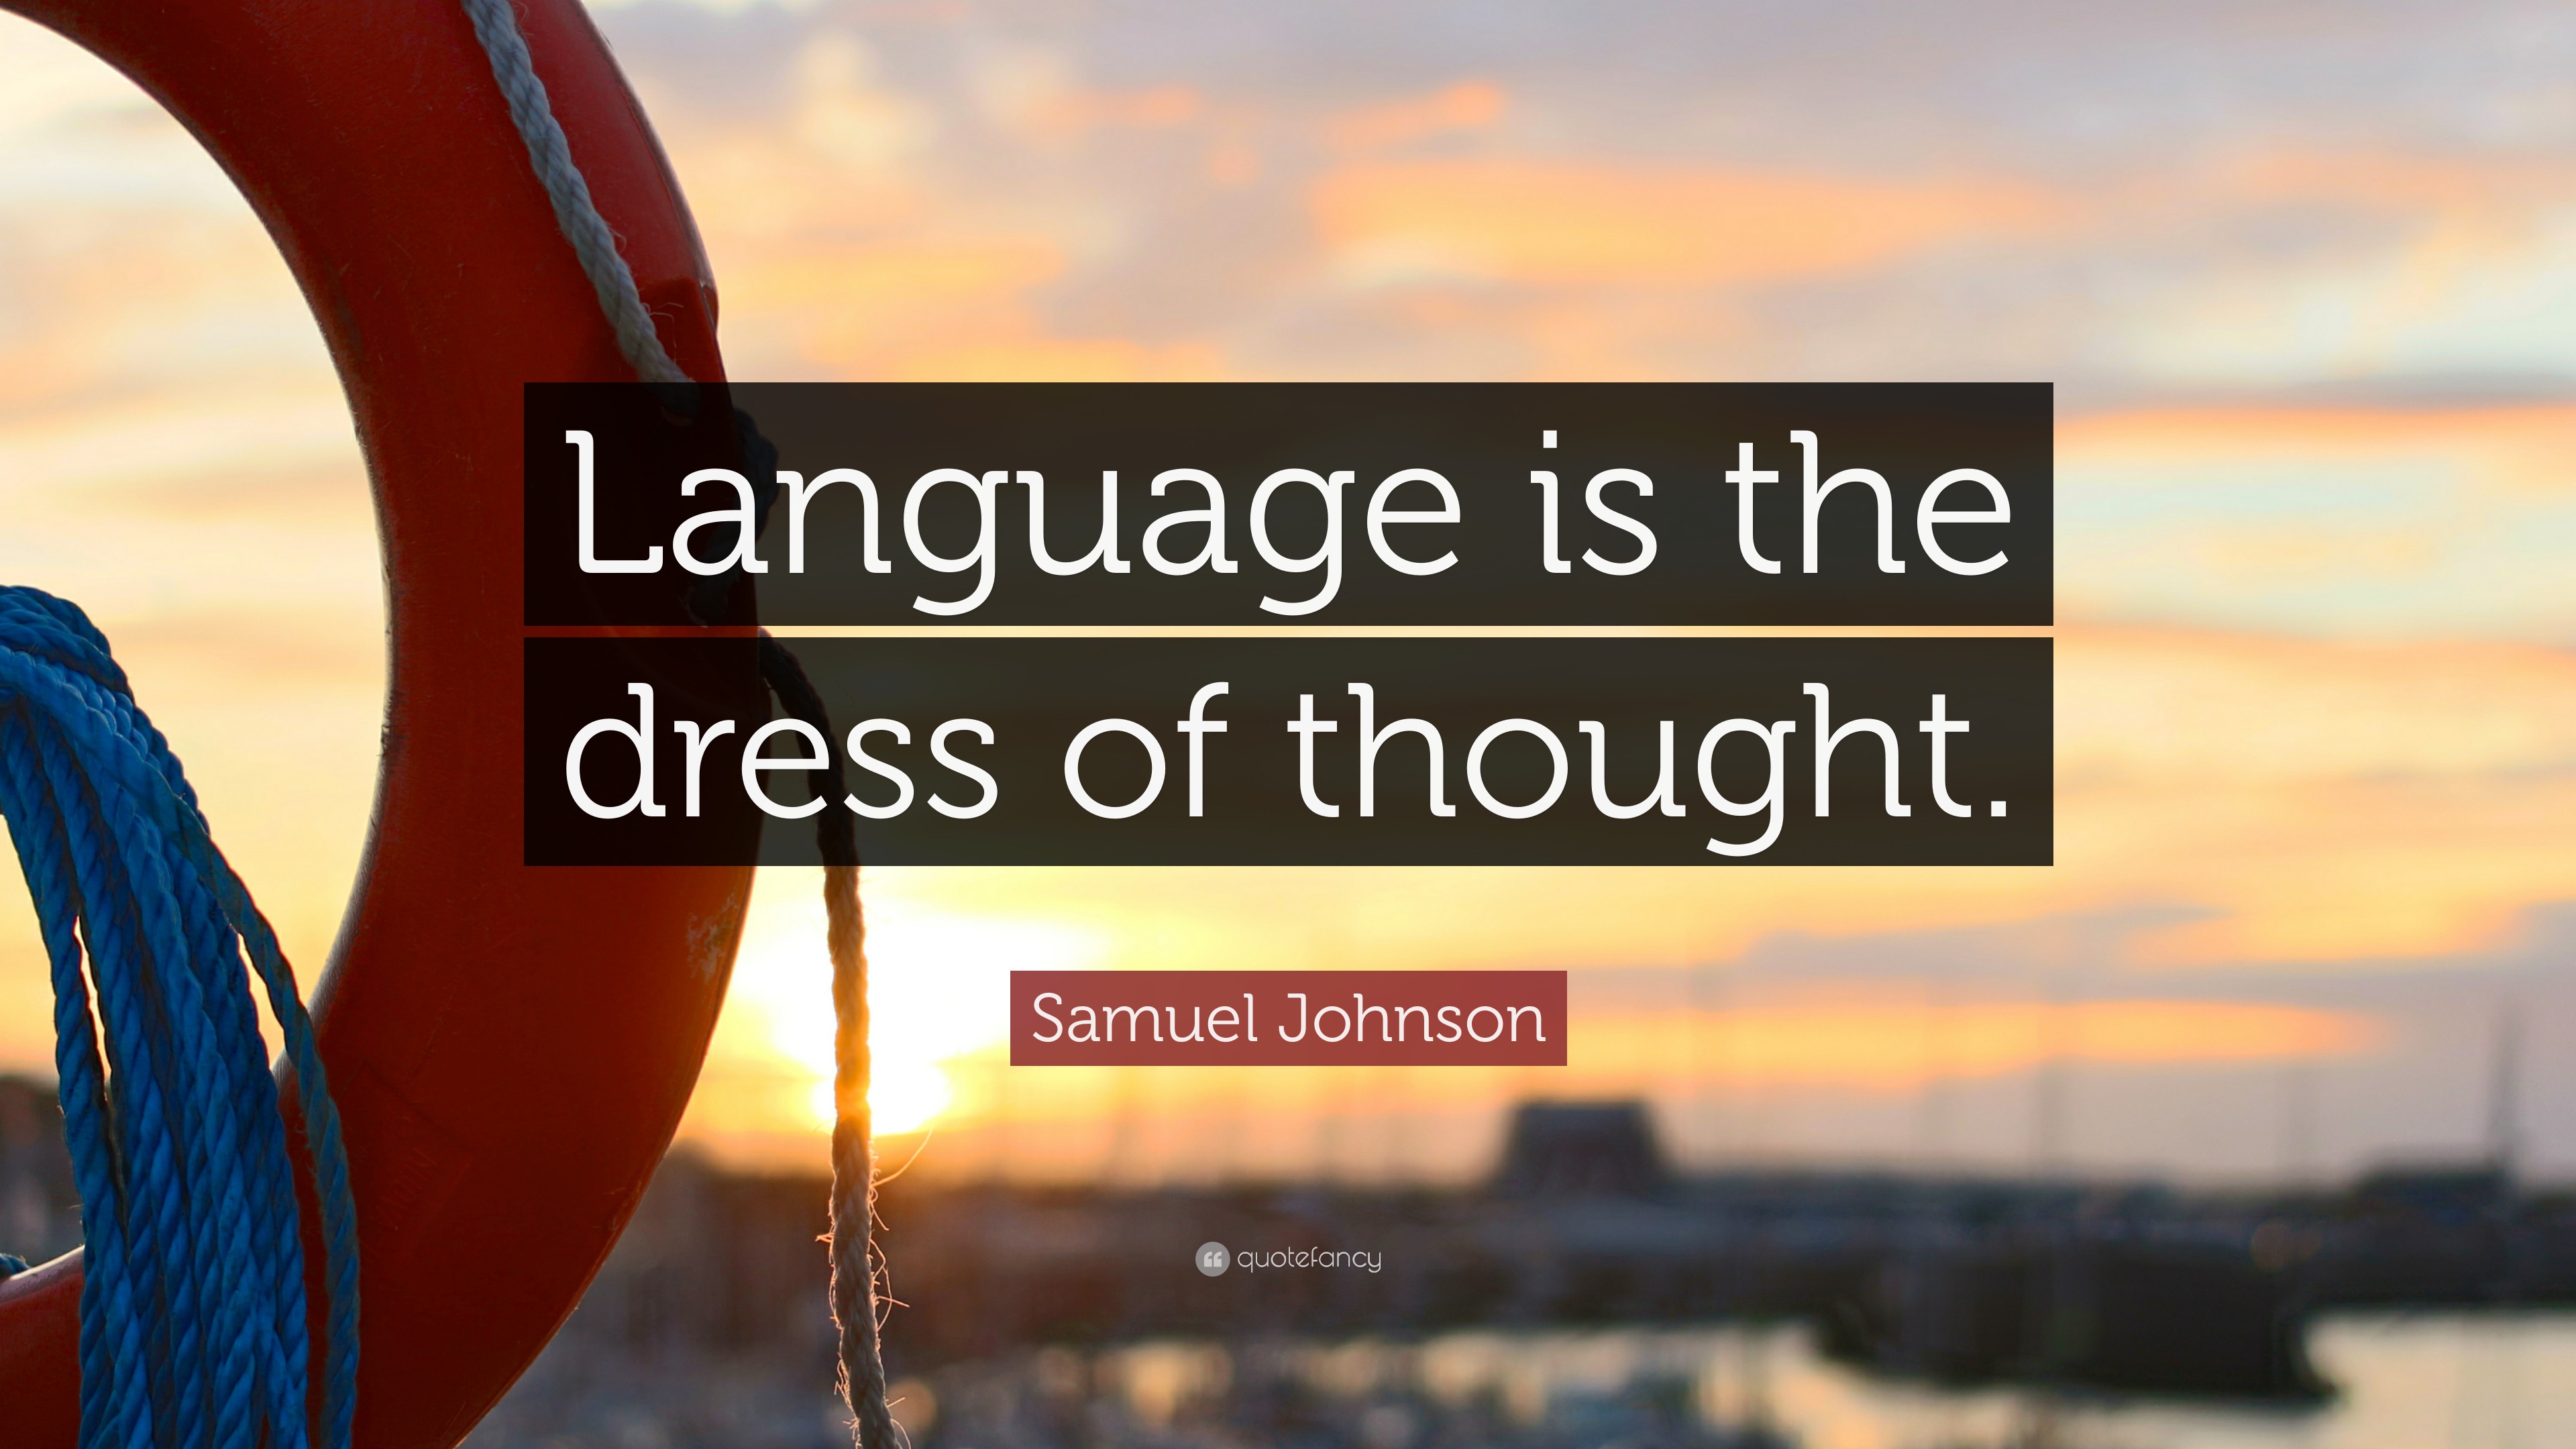 2488434 Samuel Johnson Quote Language is the dress of thought